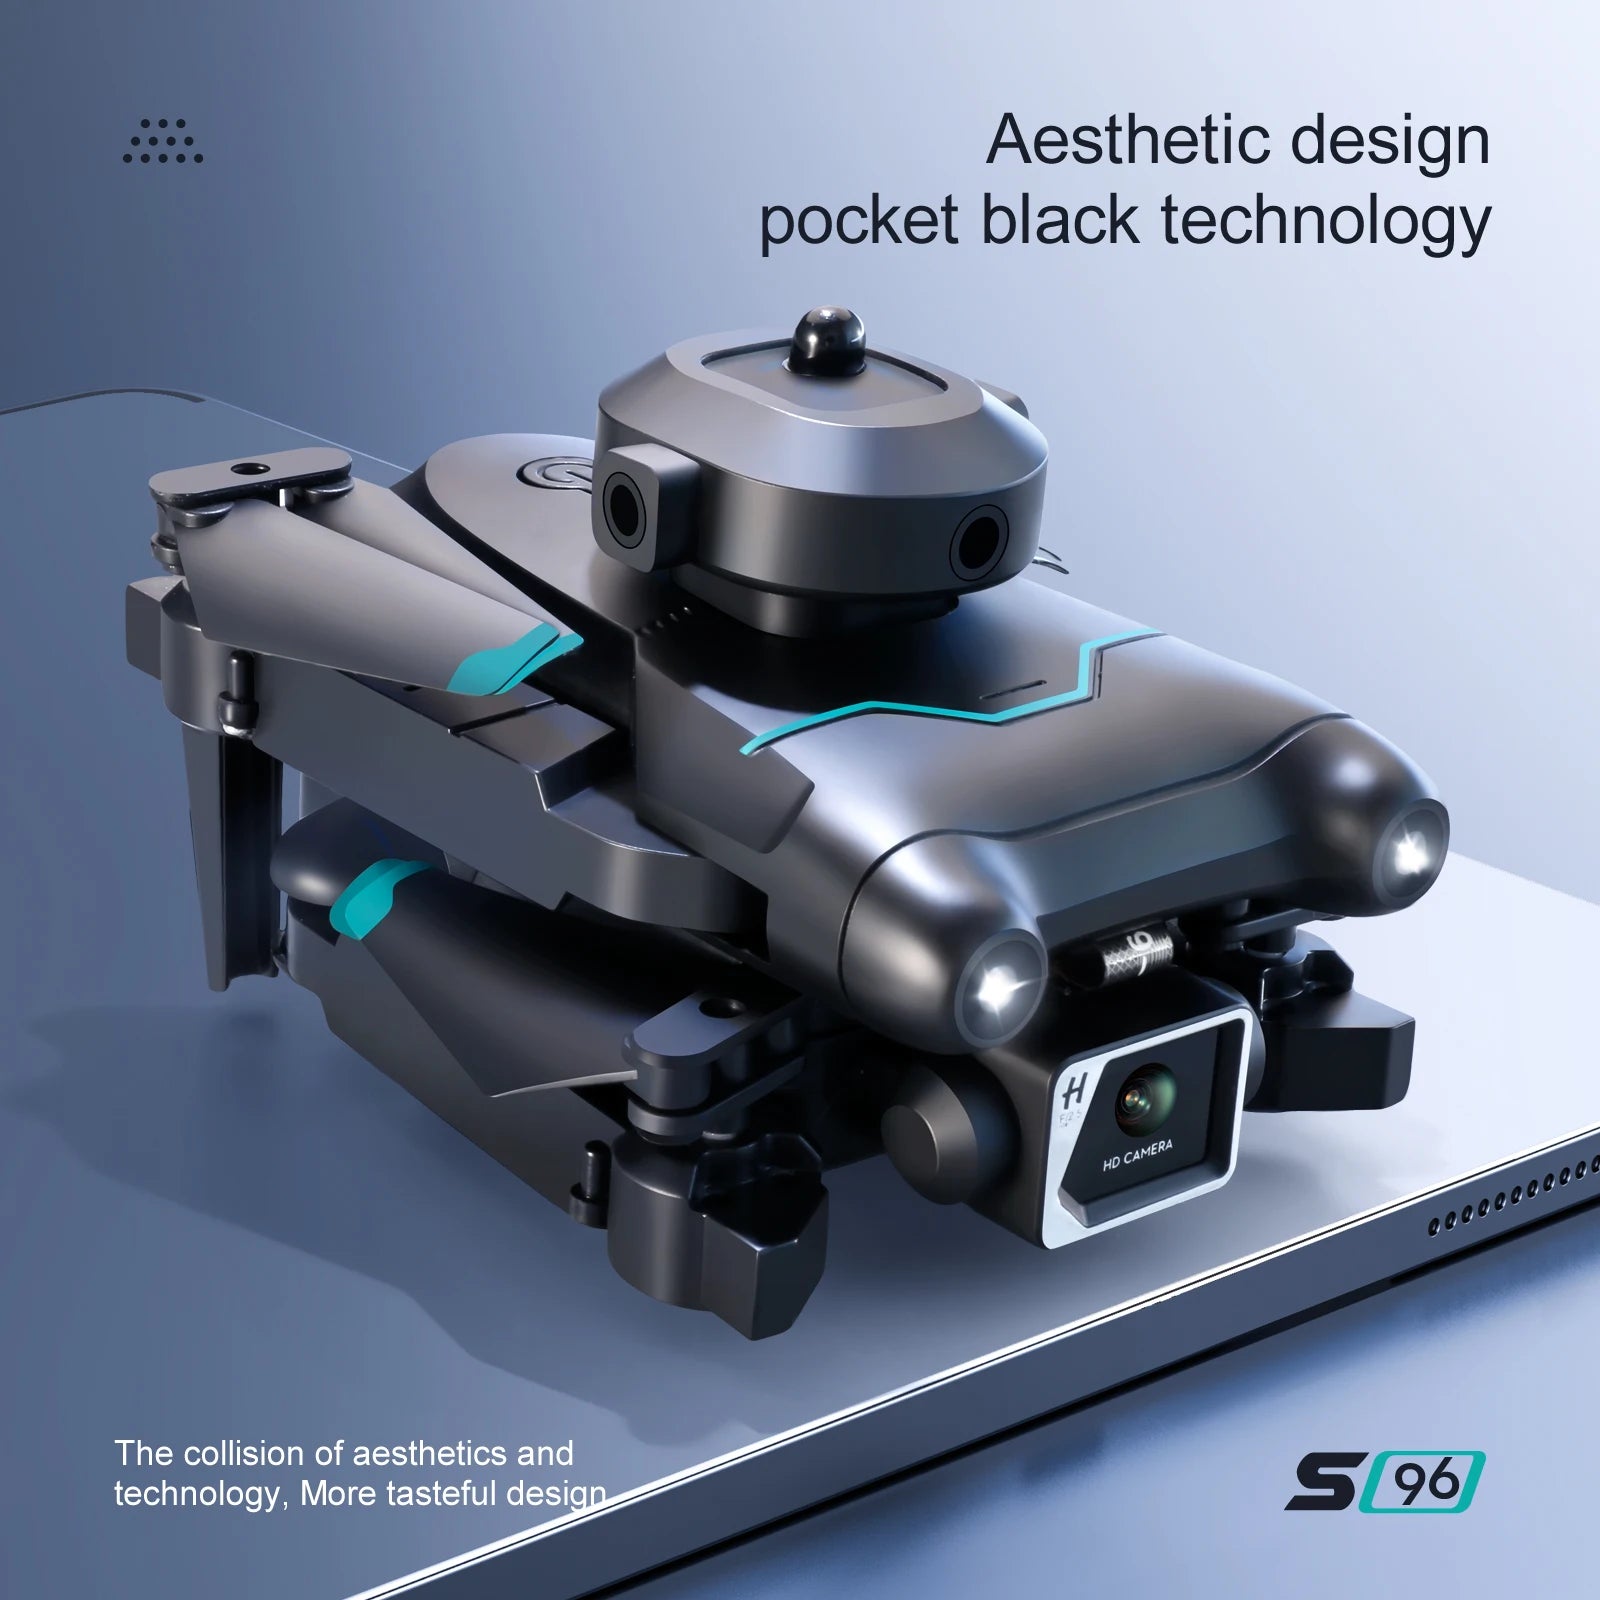 S96 Mini Drone, pocket black technology hd the collision of aesthetics and technology 